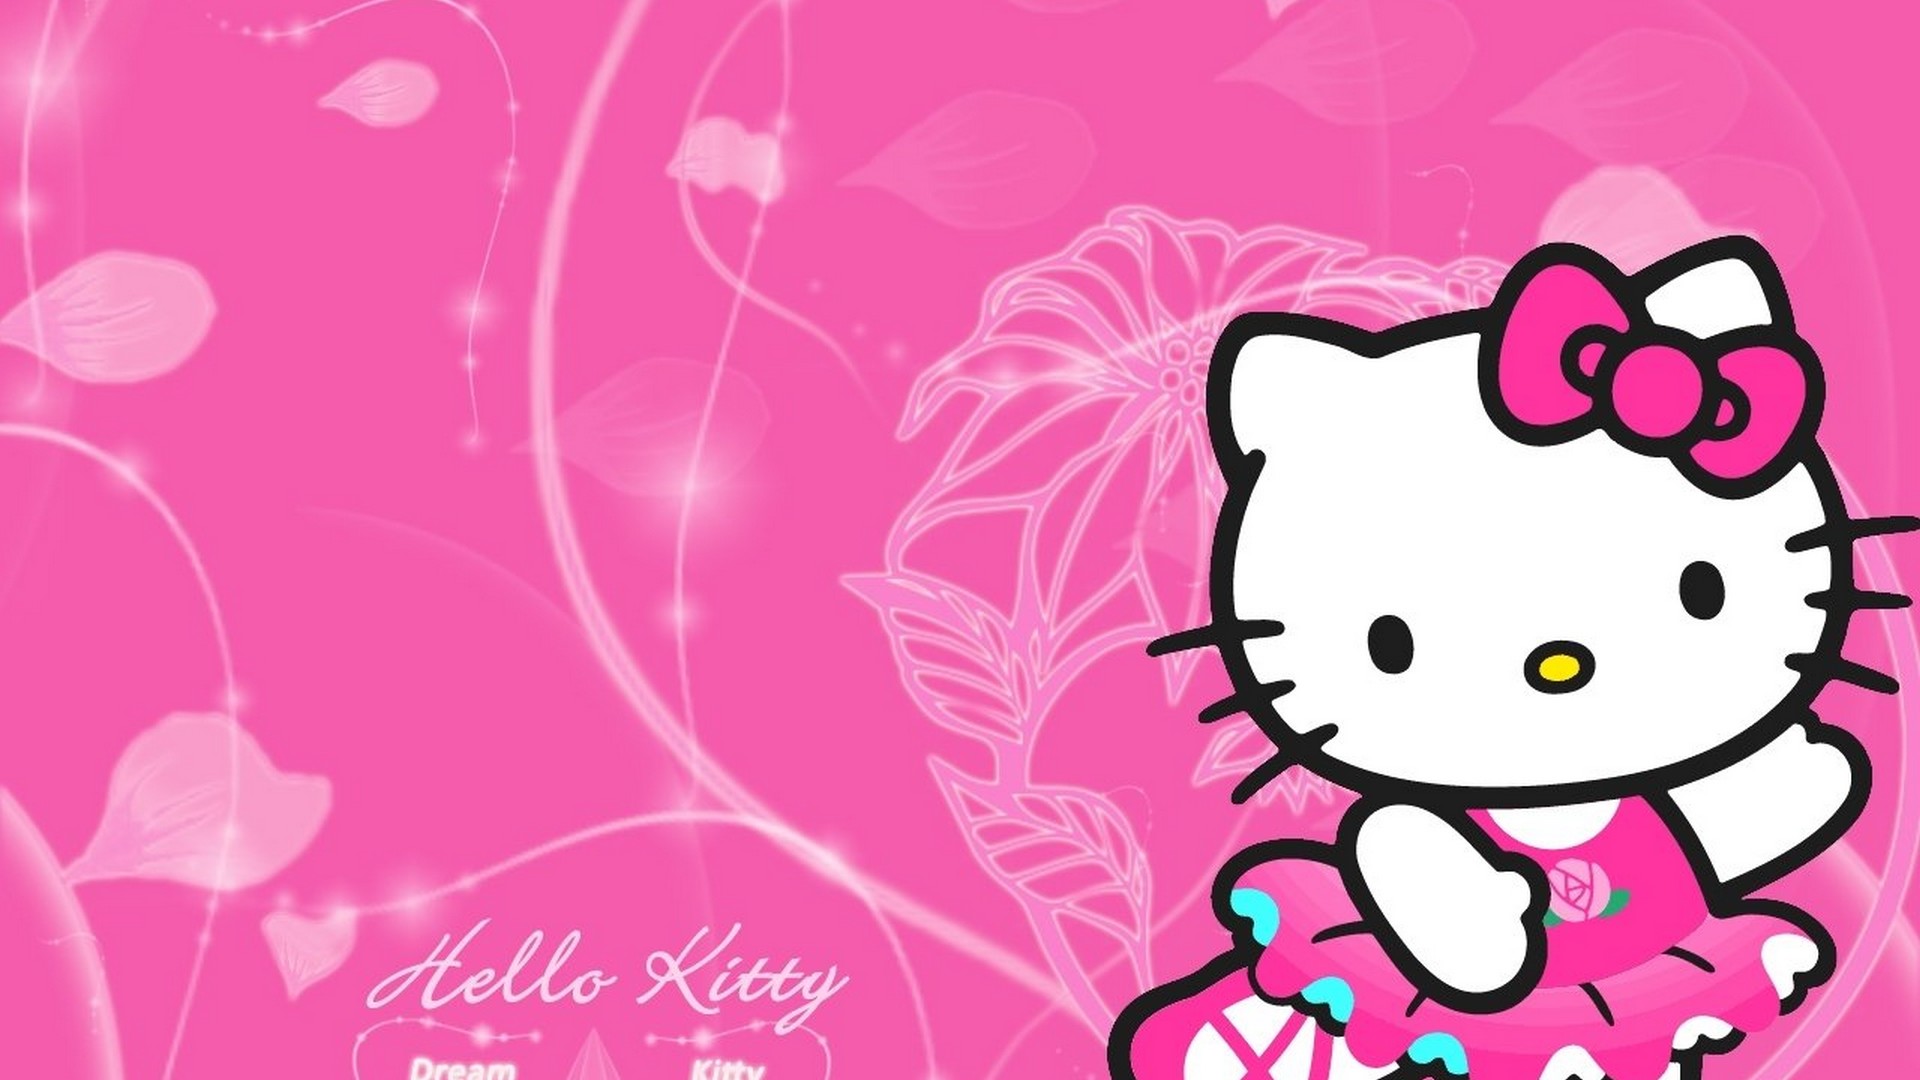 Wallpaper Hello Kitty Characters with image resolution 1920x1080 pixel. You can use this wallpaper as background for your desktop Computer Screensavers, Android or iPhone smartphones